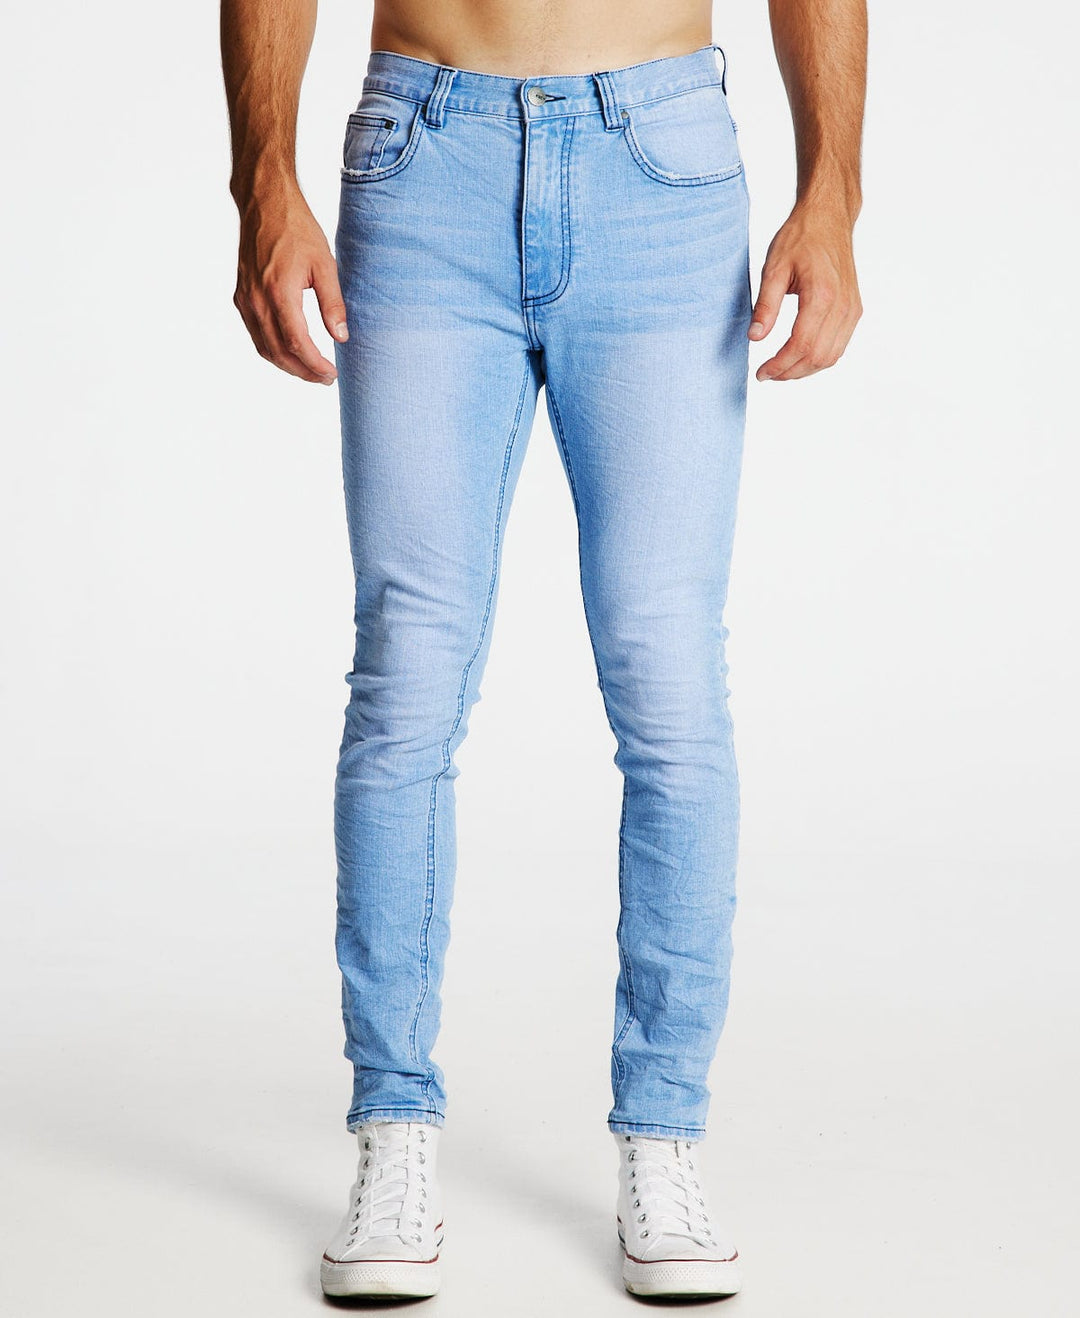 Kiss Chacey K1 Super Skinny Fit Jean - Crystal Blue